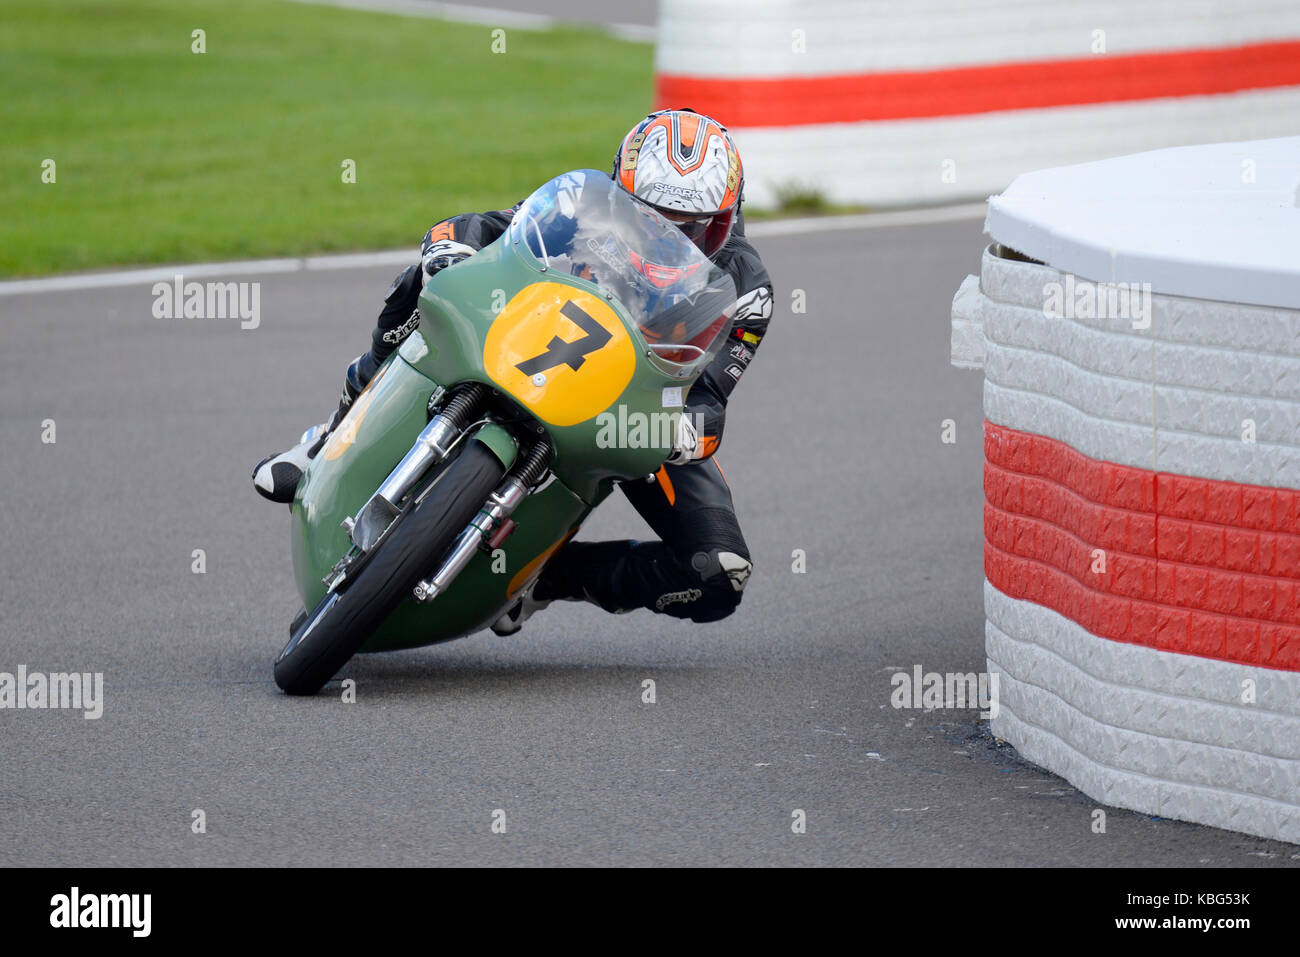 1962 Norton Manx 500 owned by Susan Barford ridden by Jeremy McWilliams racing at Goodwood Revival 2017 Stock Photo